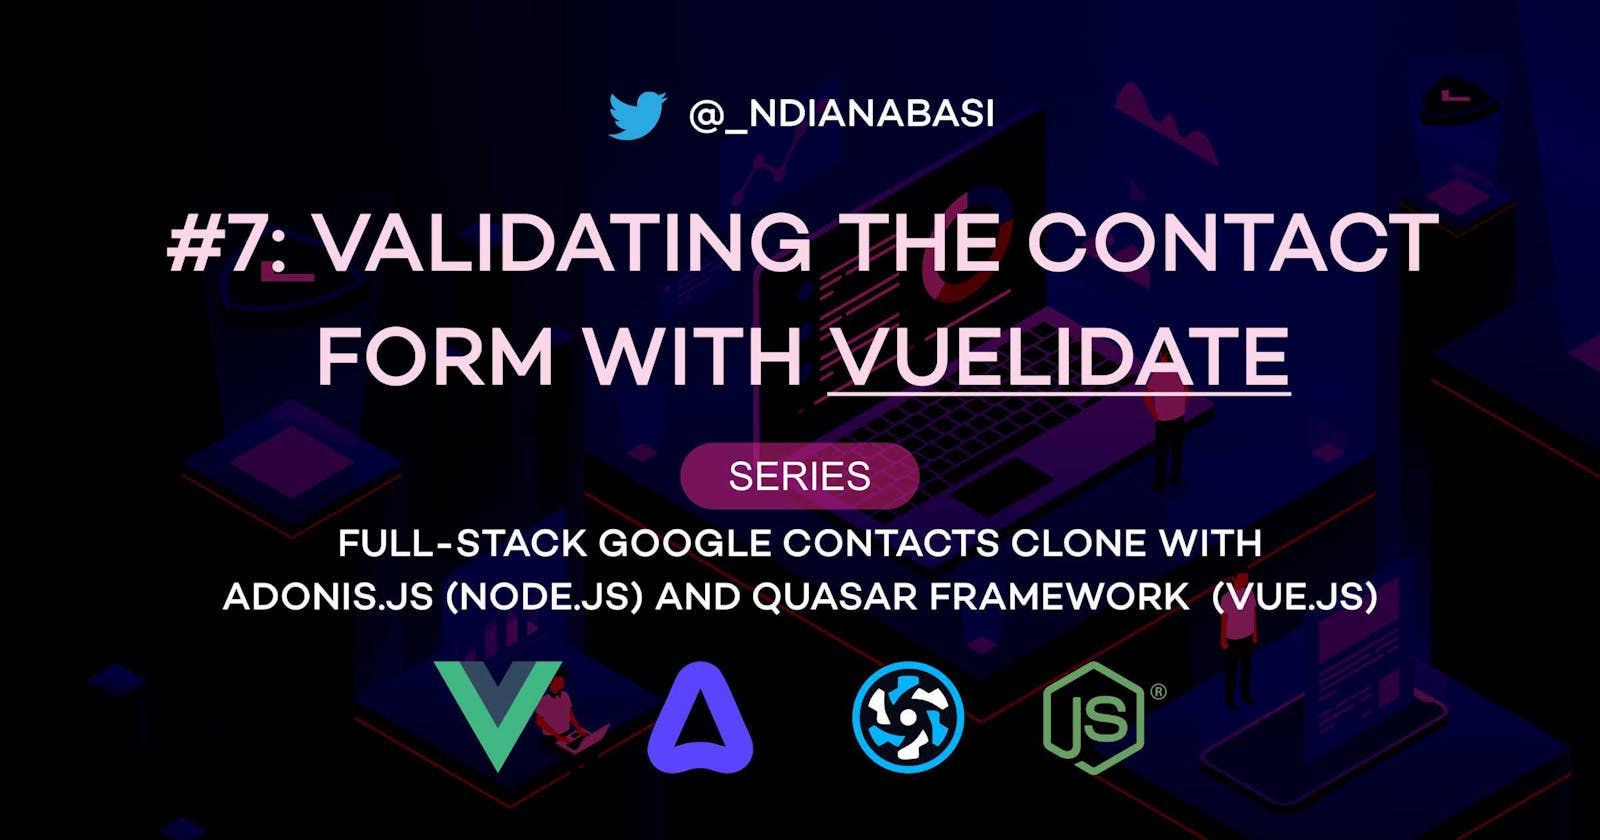 Validating the Contact Form with Vuelidate | Full-Stack Google Contacts Clone with Adonis.js/Node.js and Quasar (Vue.js)